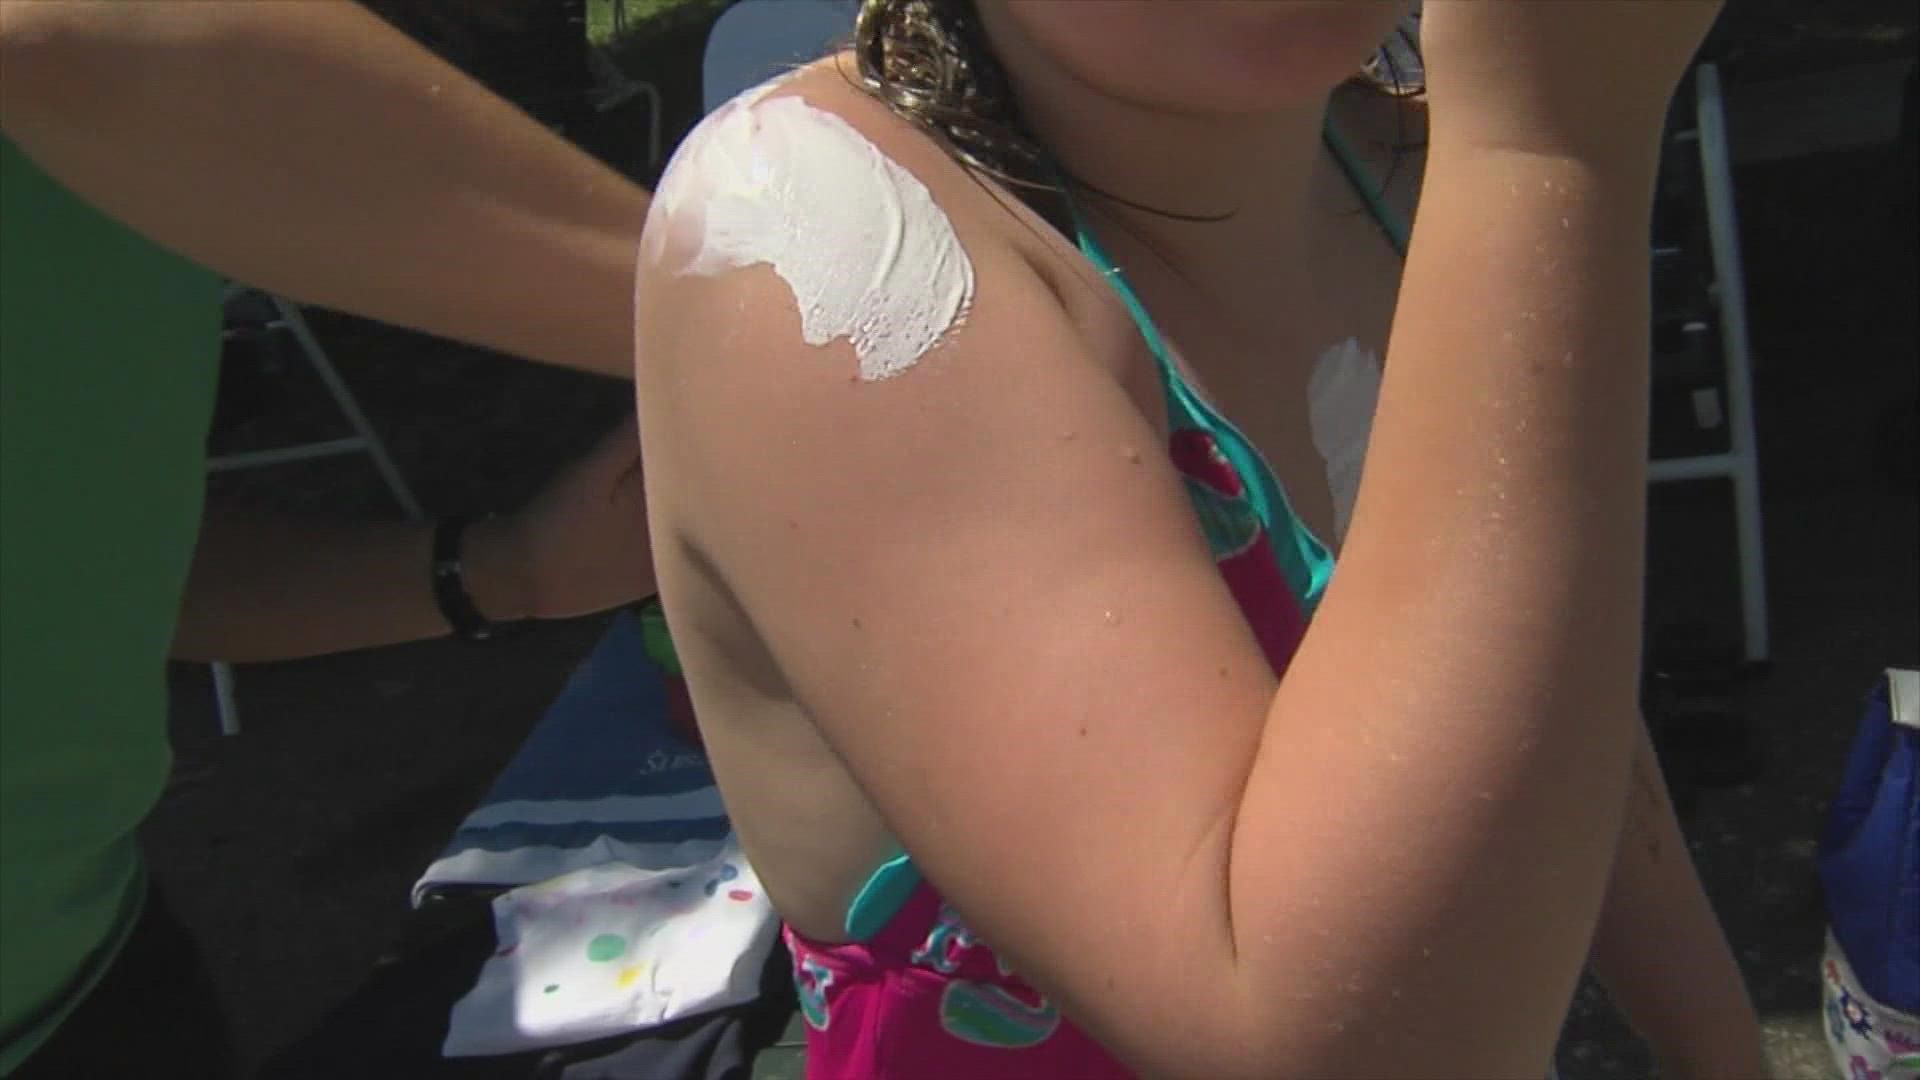 Kids might not always take the proper precautions in the sun.